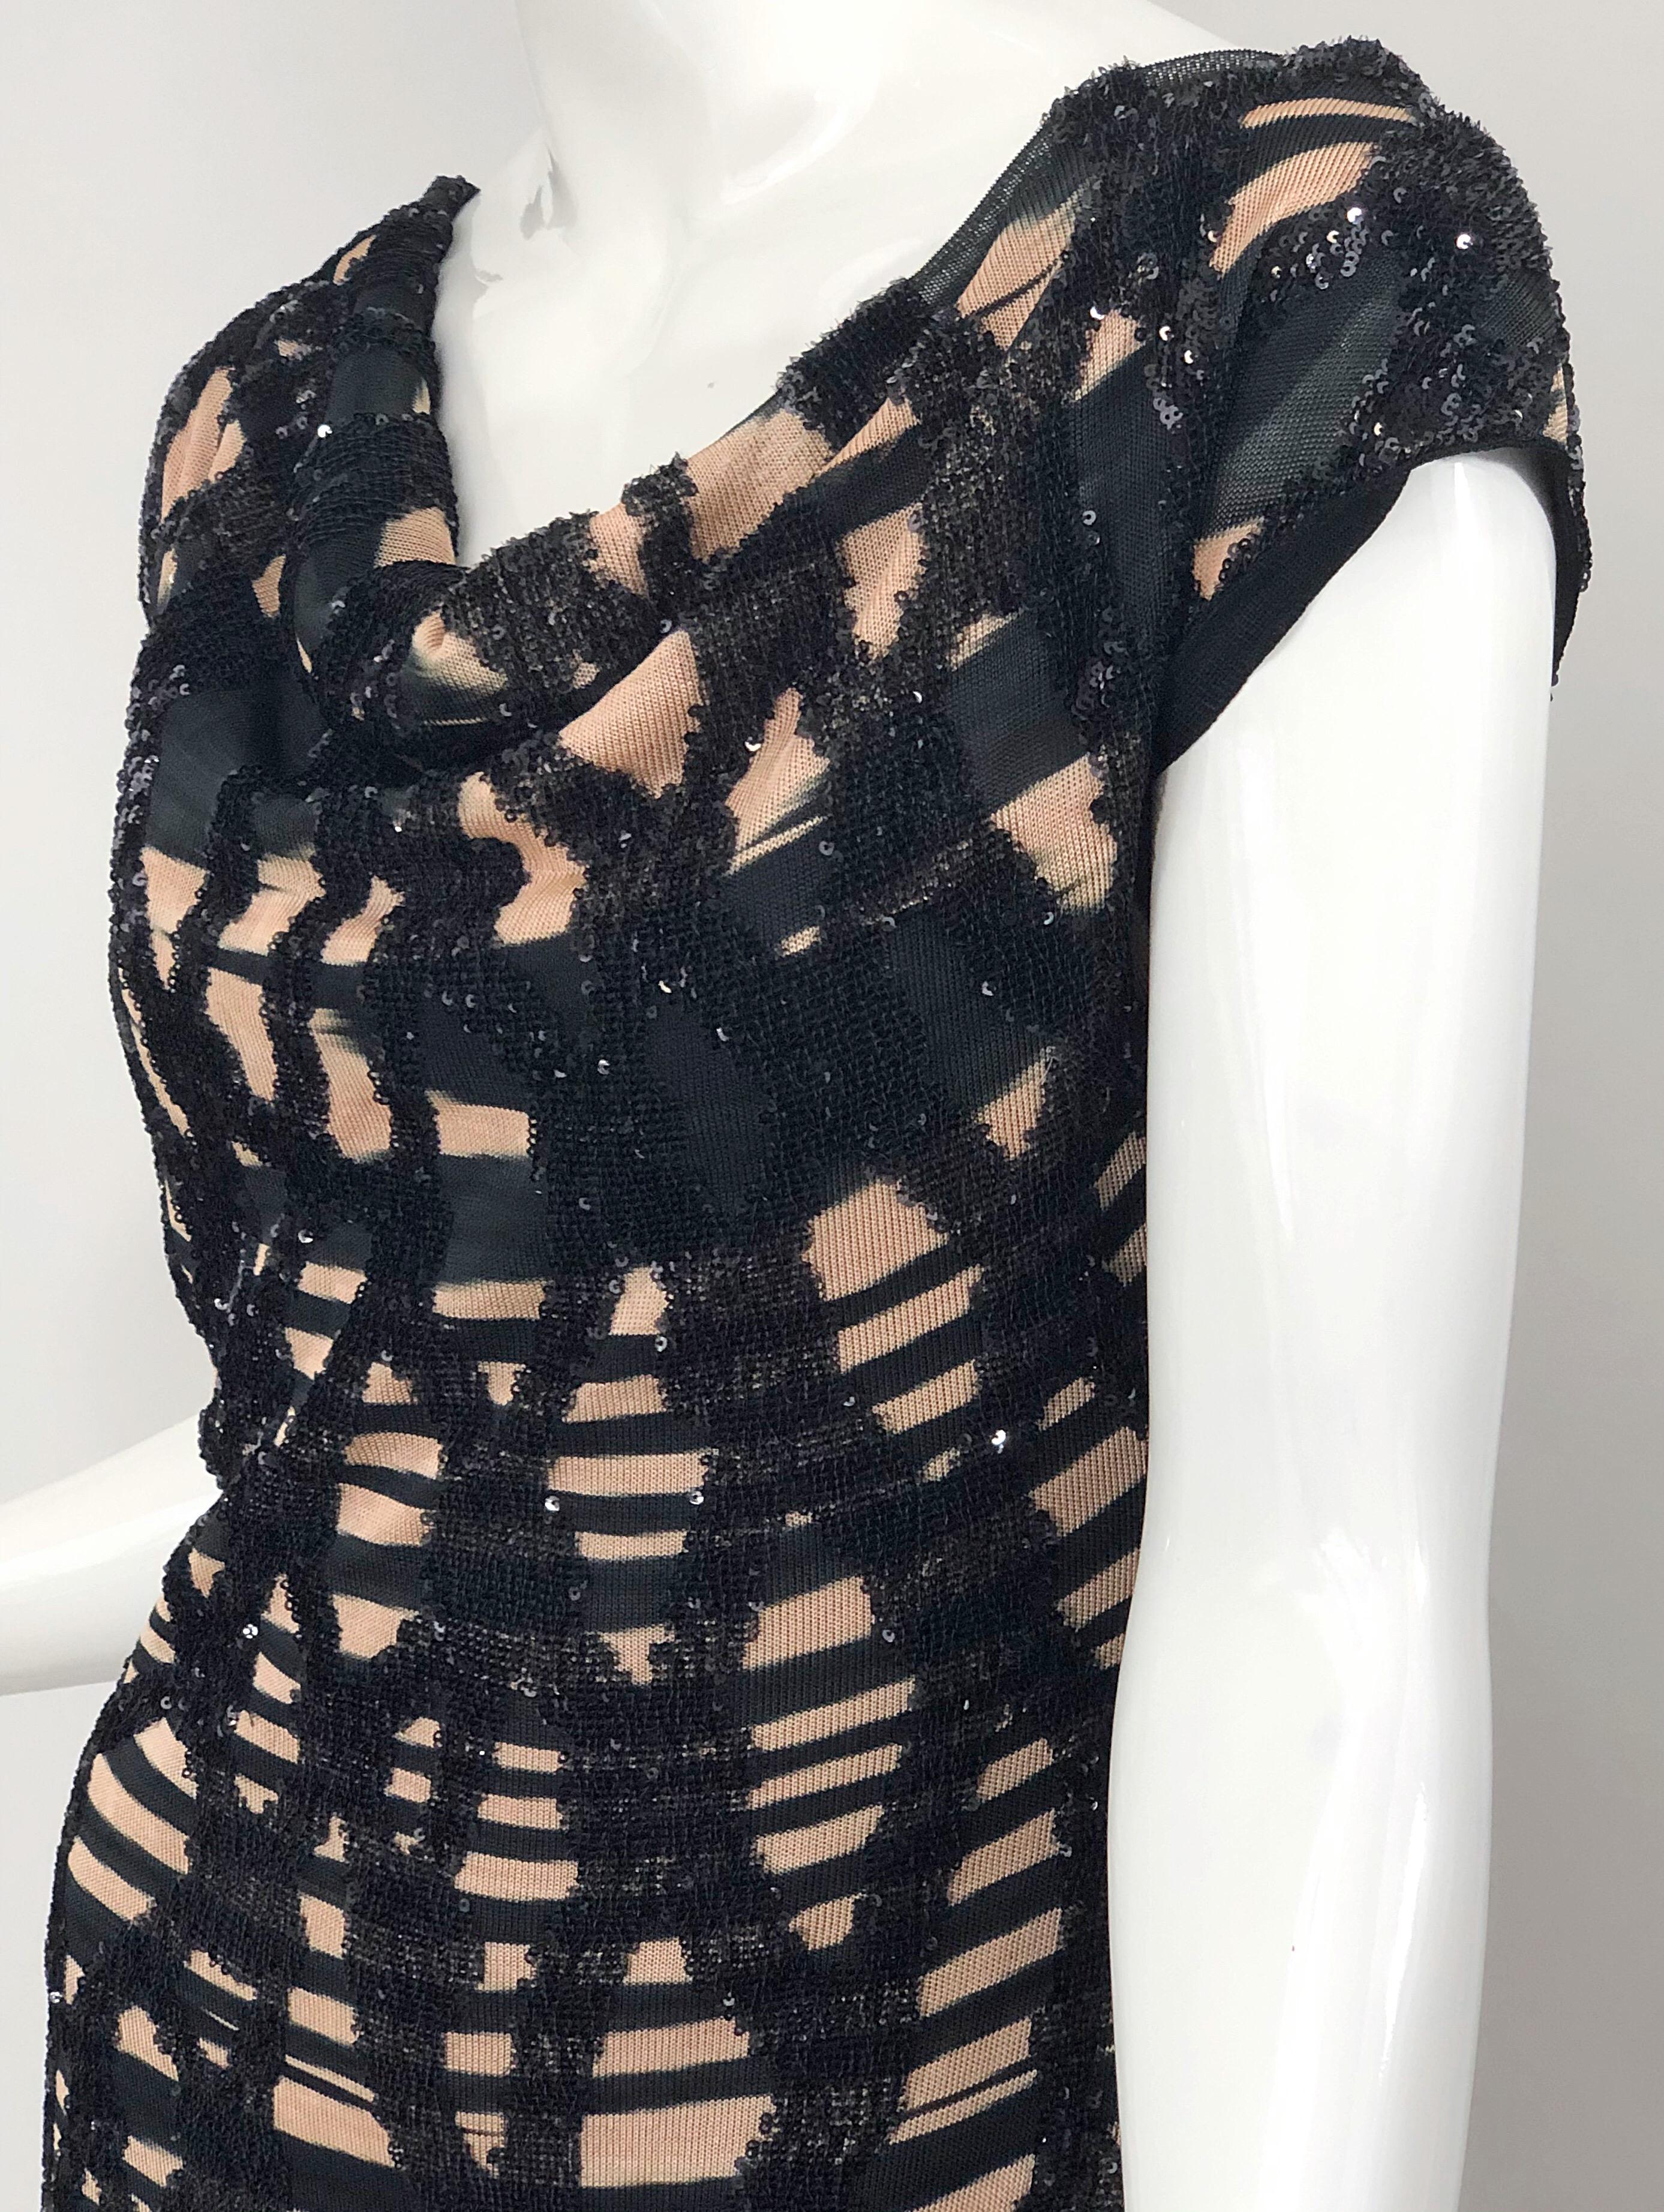 Missoni Early 2000s Black + Nude Sequined Size 40 / 4 - 6 Abstract Mini Dress In Excellent Condition For Sale In San Diego, CA